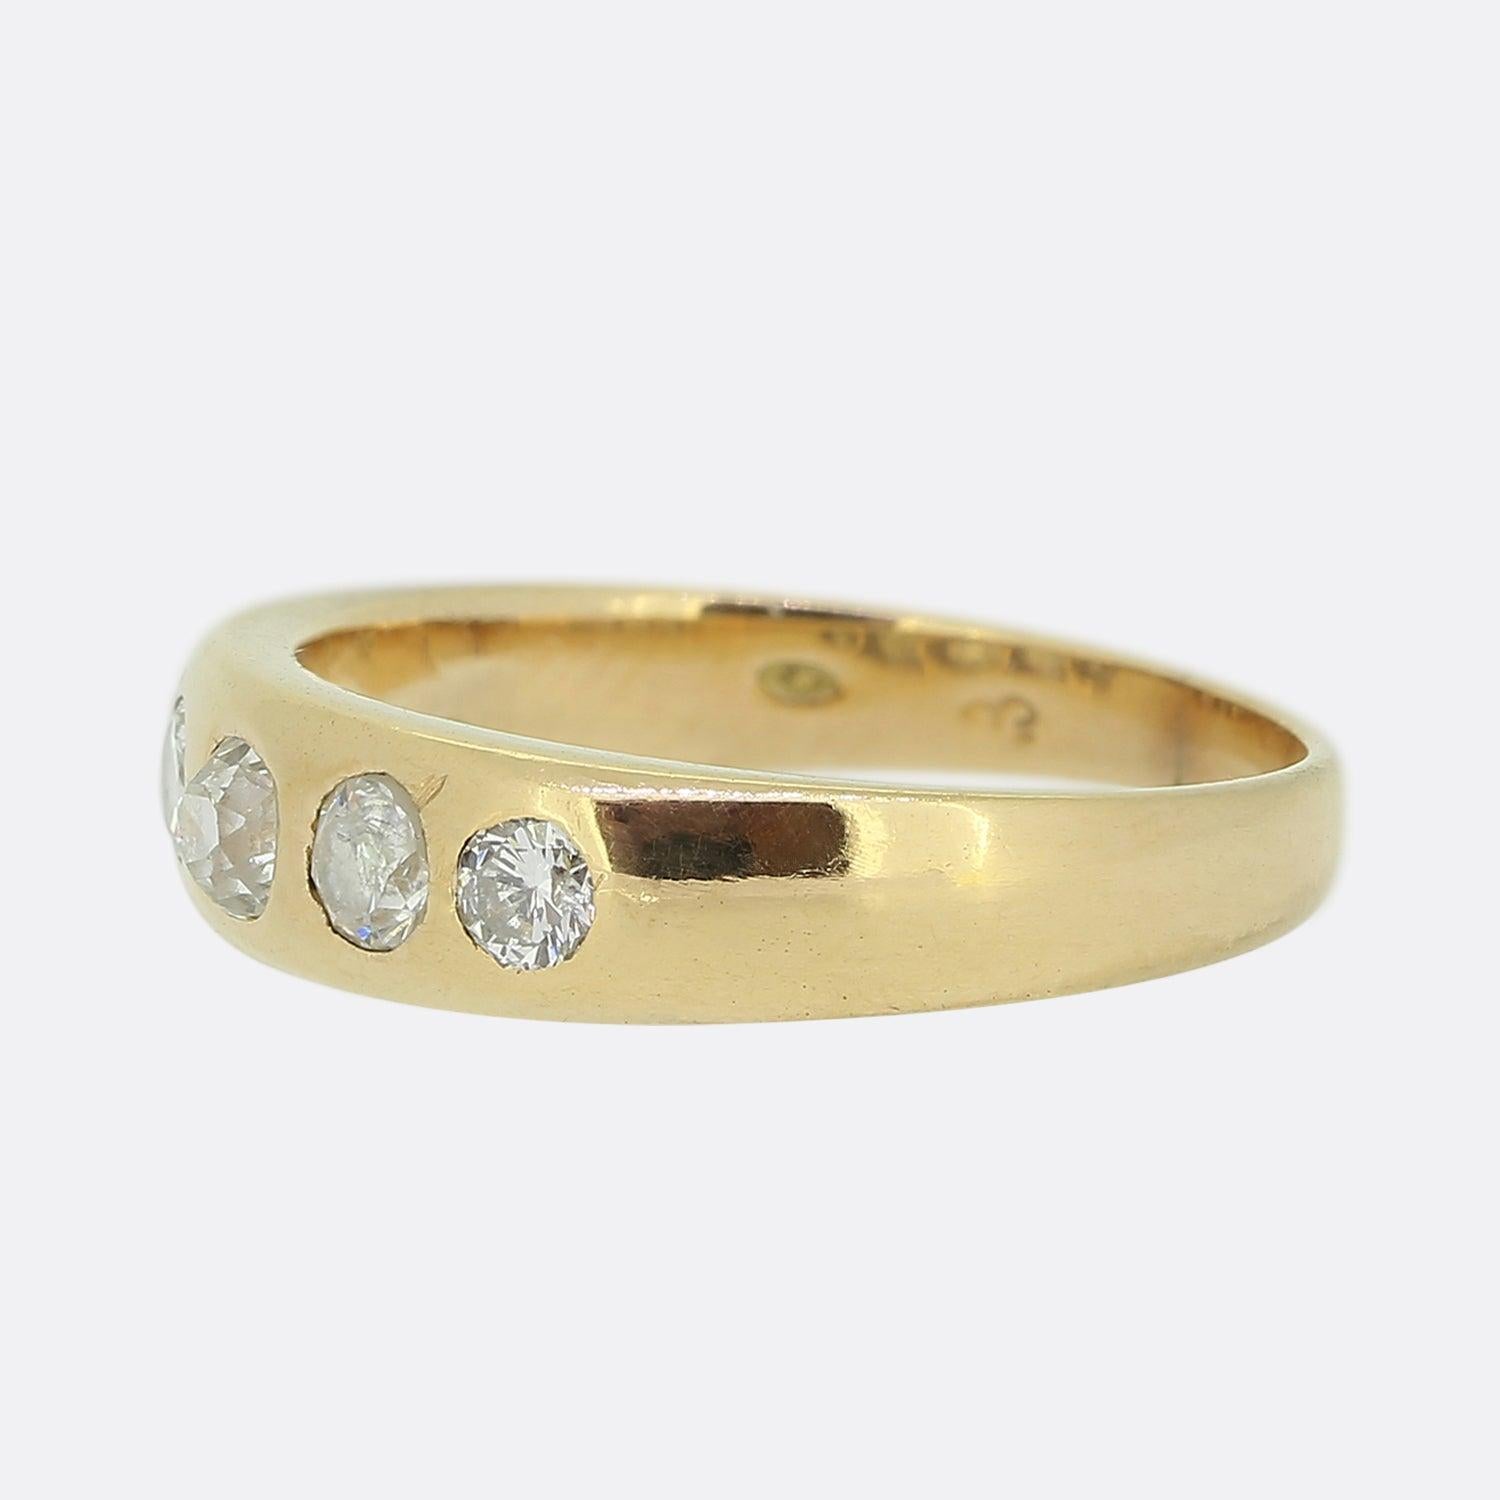 Here we have a classic five-stone diamond ring. This vintage piece has been crafted from 18ct yellow gold and showcases five round faceted natural diamonds in a single line formation; all of which have been individually rub-over set and graduate